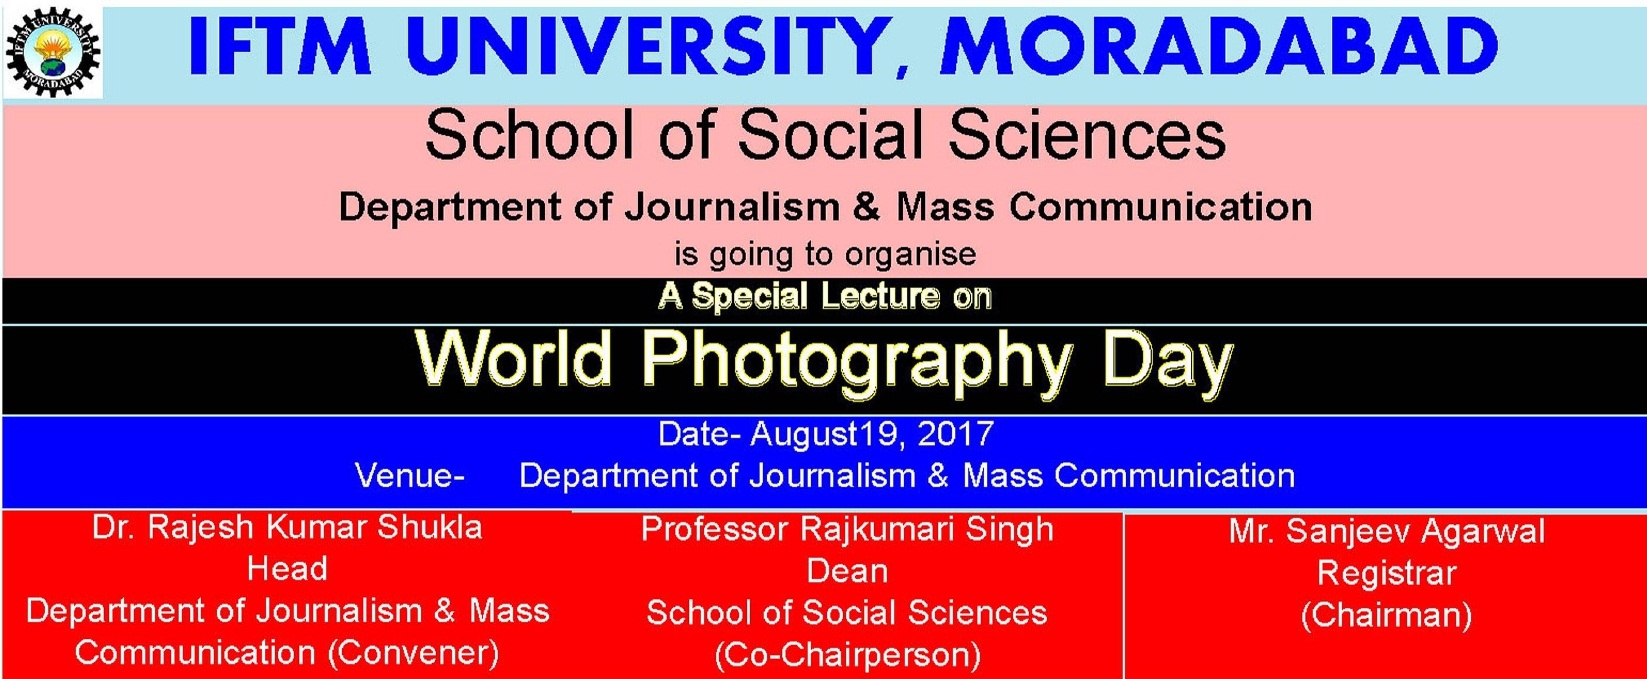 Special Lecture on World Photography Day